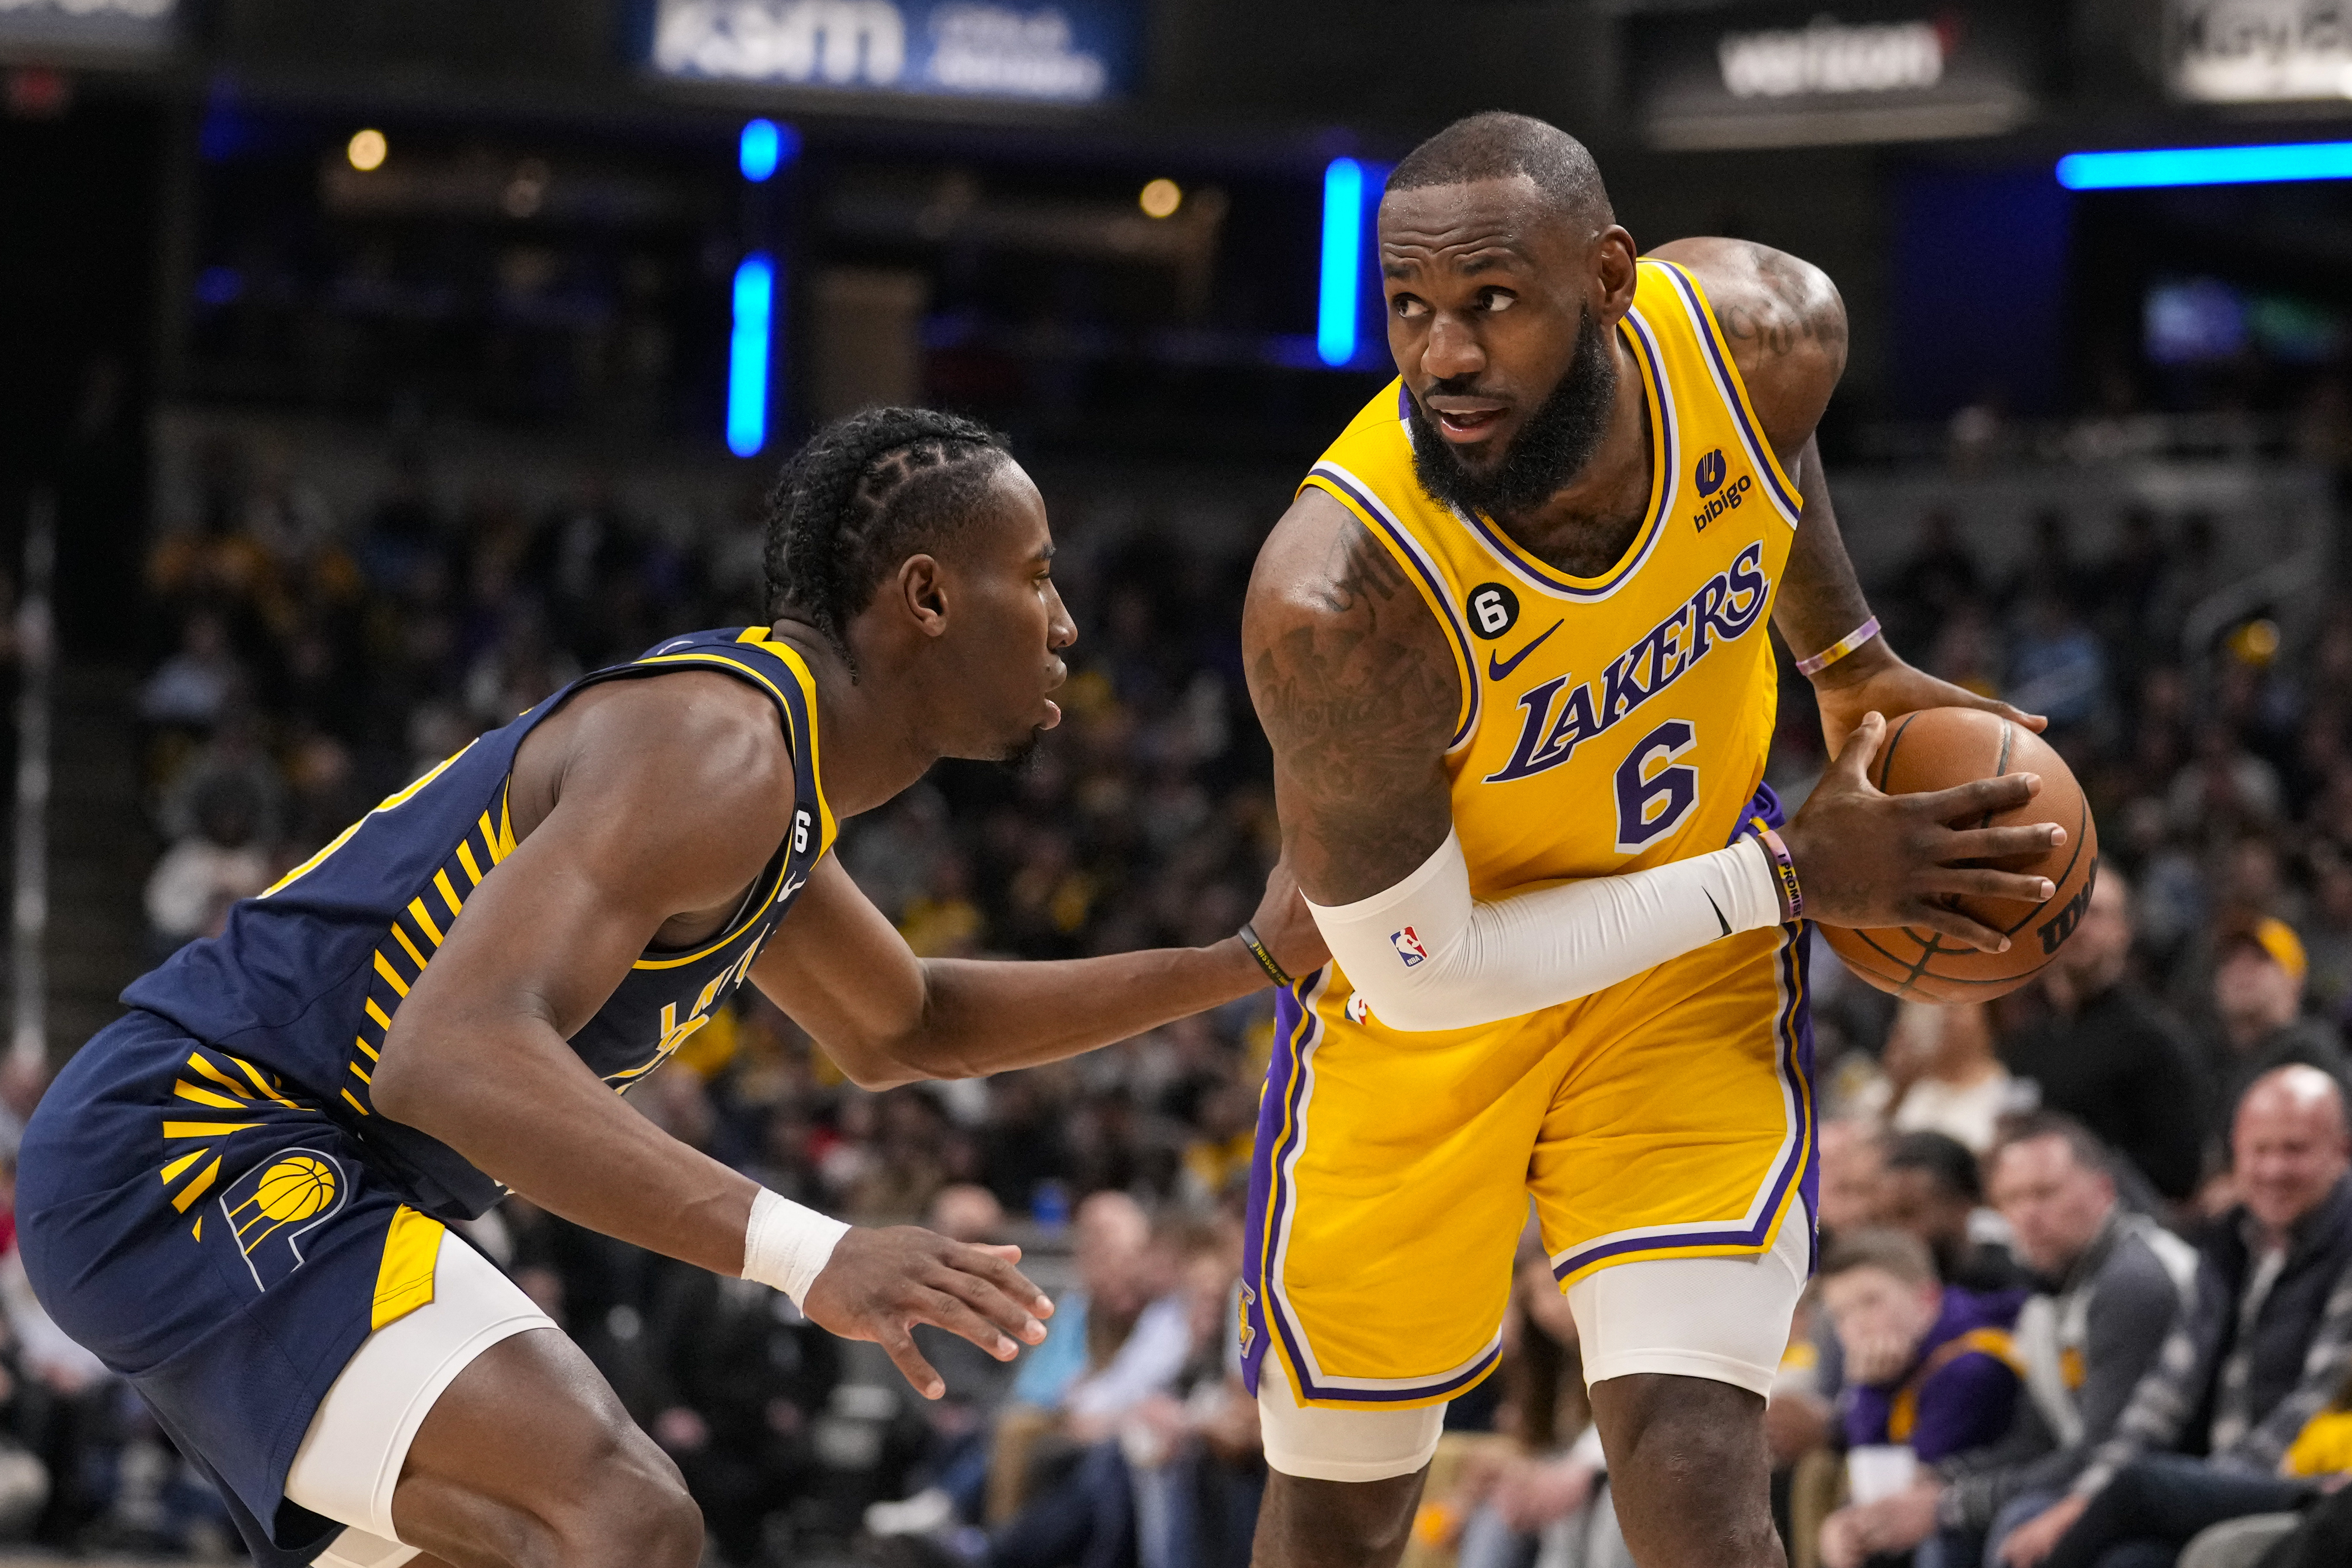 LeBron James chases NBA scoring record as Lakers battle Thunder Free NBA live stream, how to watch, time, channel